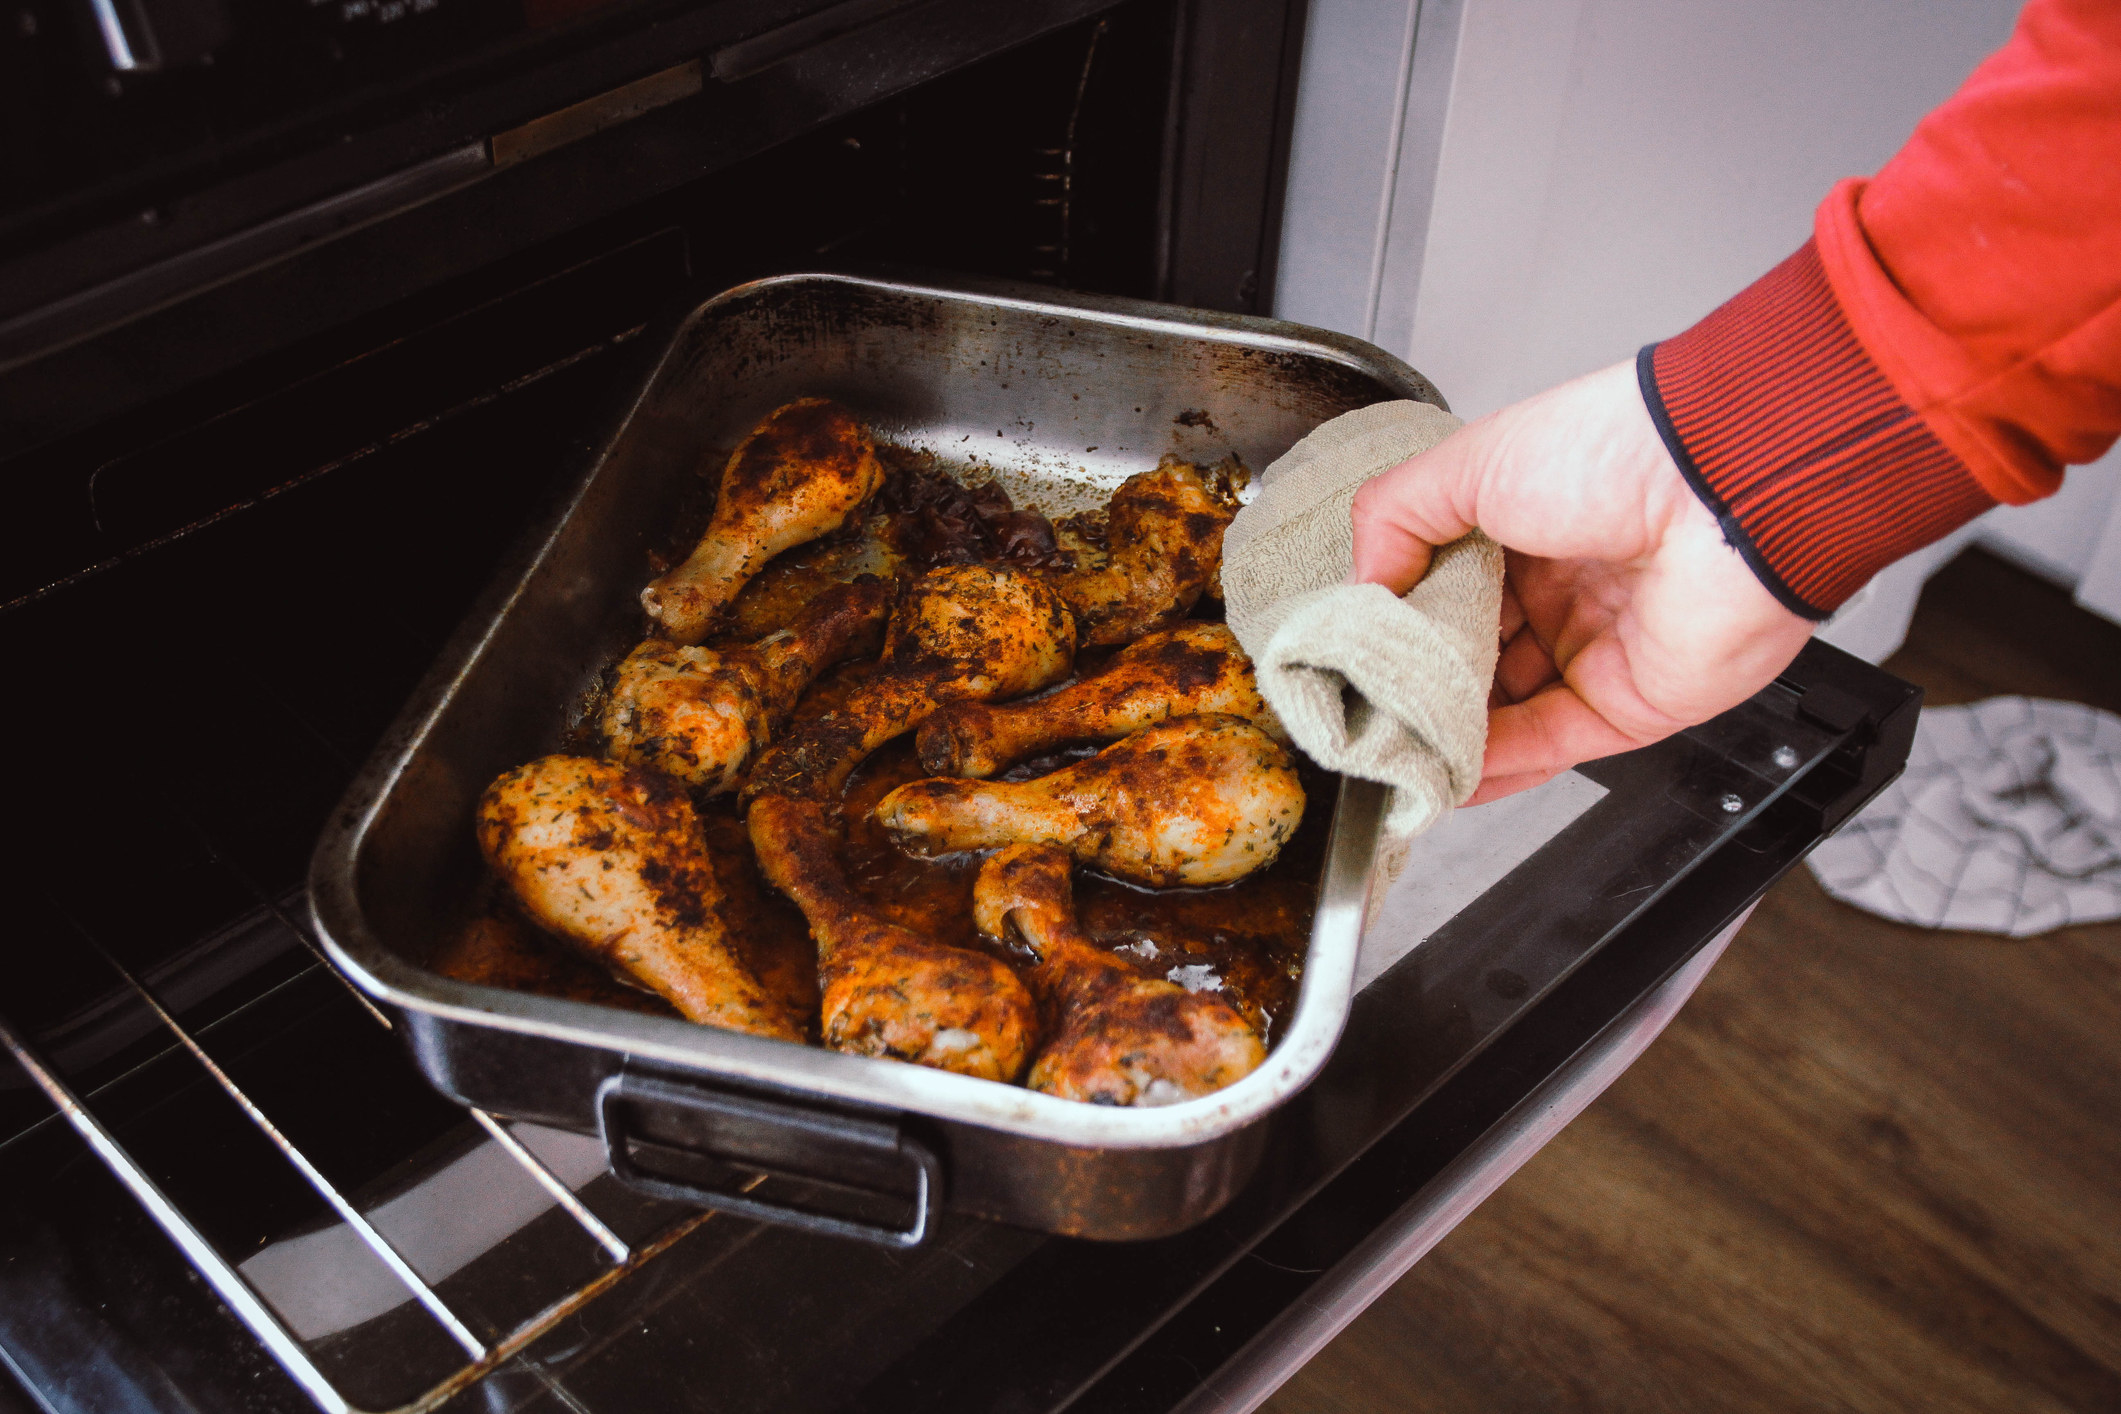 Hands getting a roasting tray of chicken out of the oven.